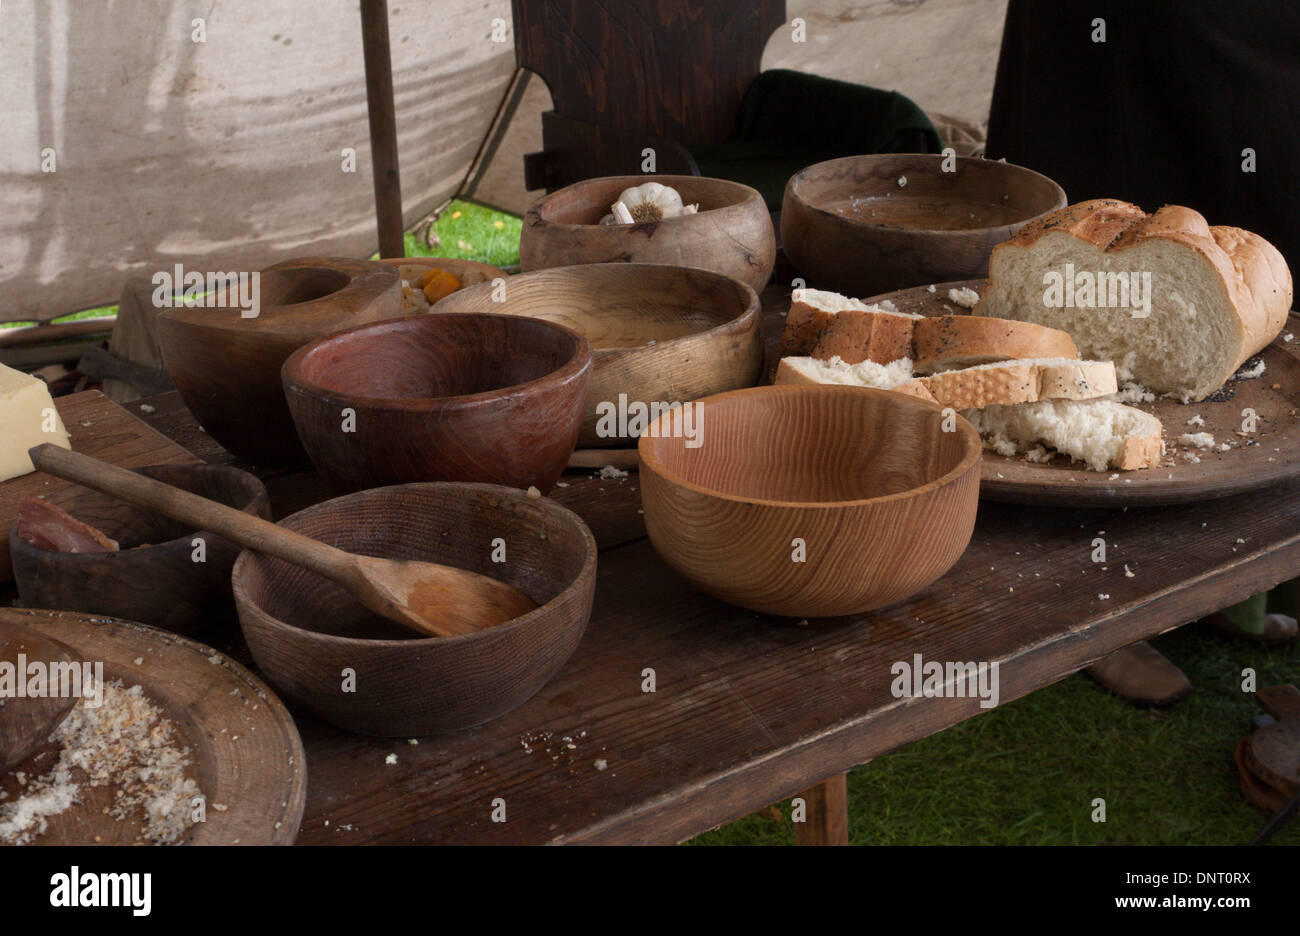 Food and crockery and cutlery in the style of the 12th - 13th  century, taken at a festival of history. Stock Photo